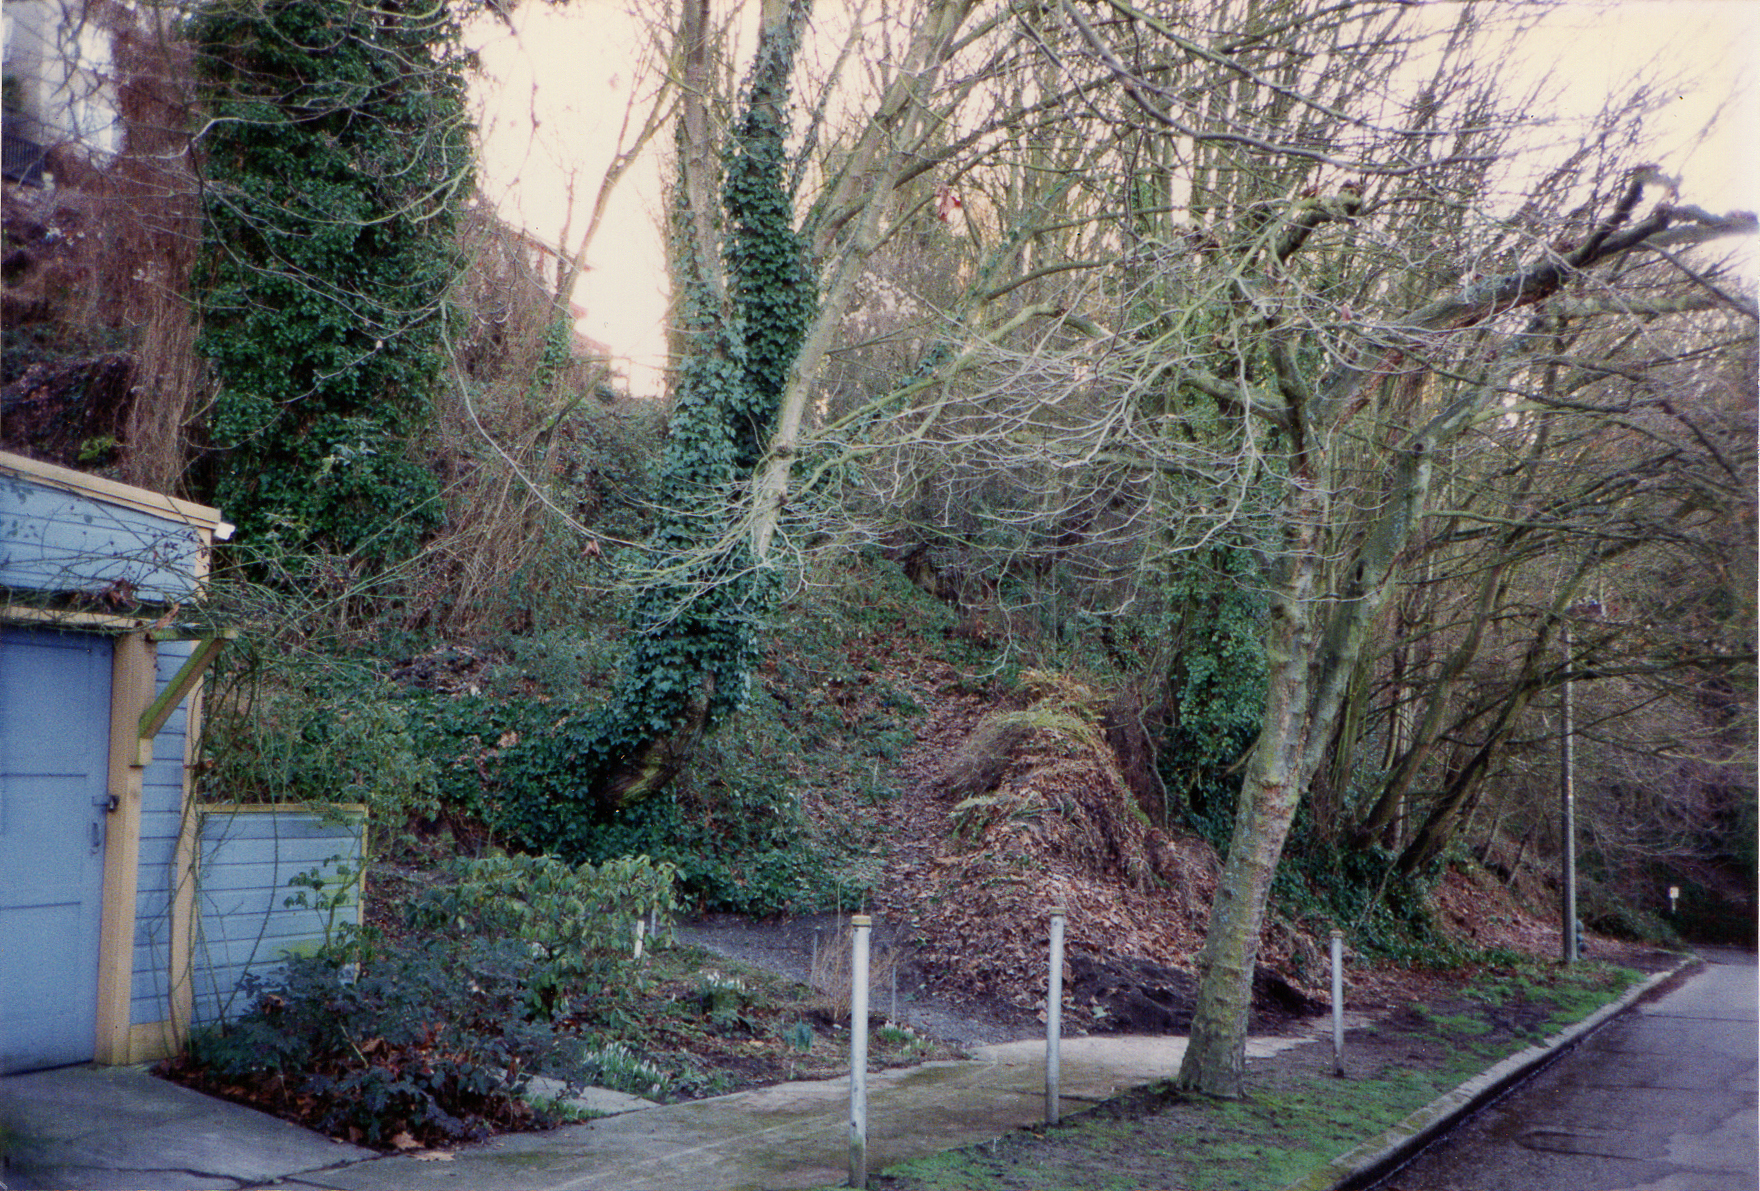 View of the Lower Dell and Slide Path in 1994